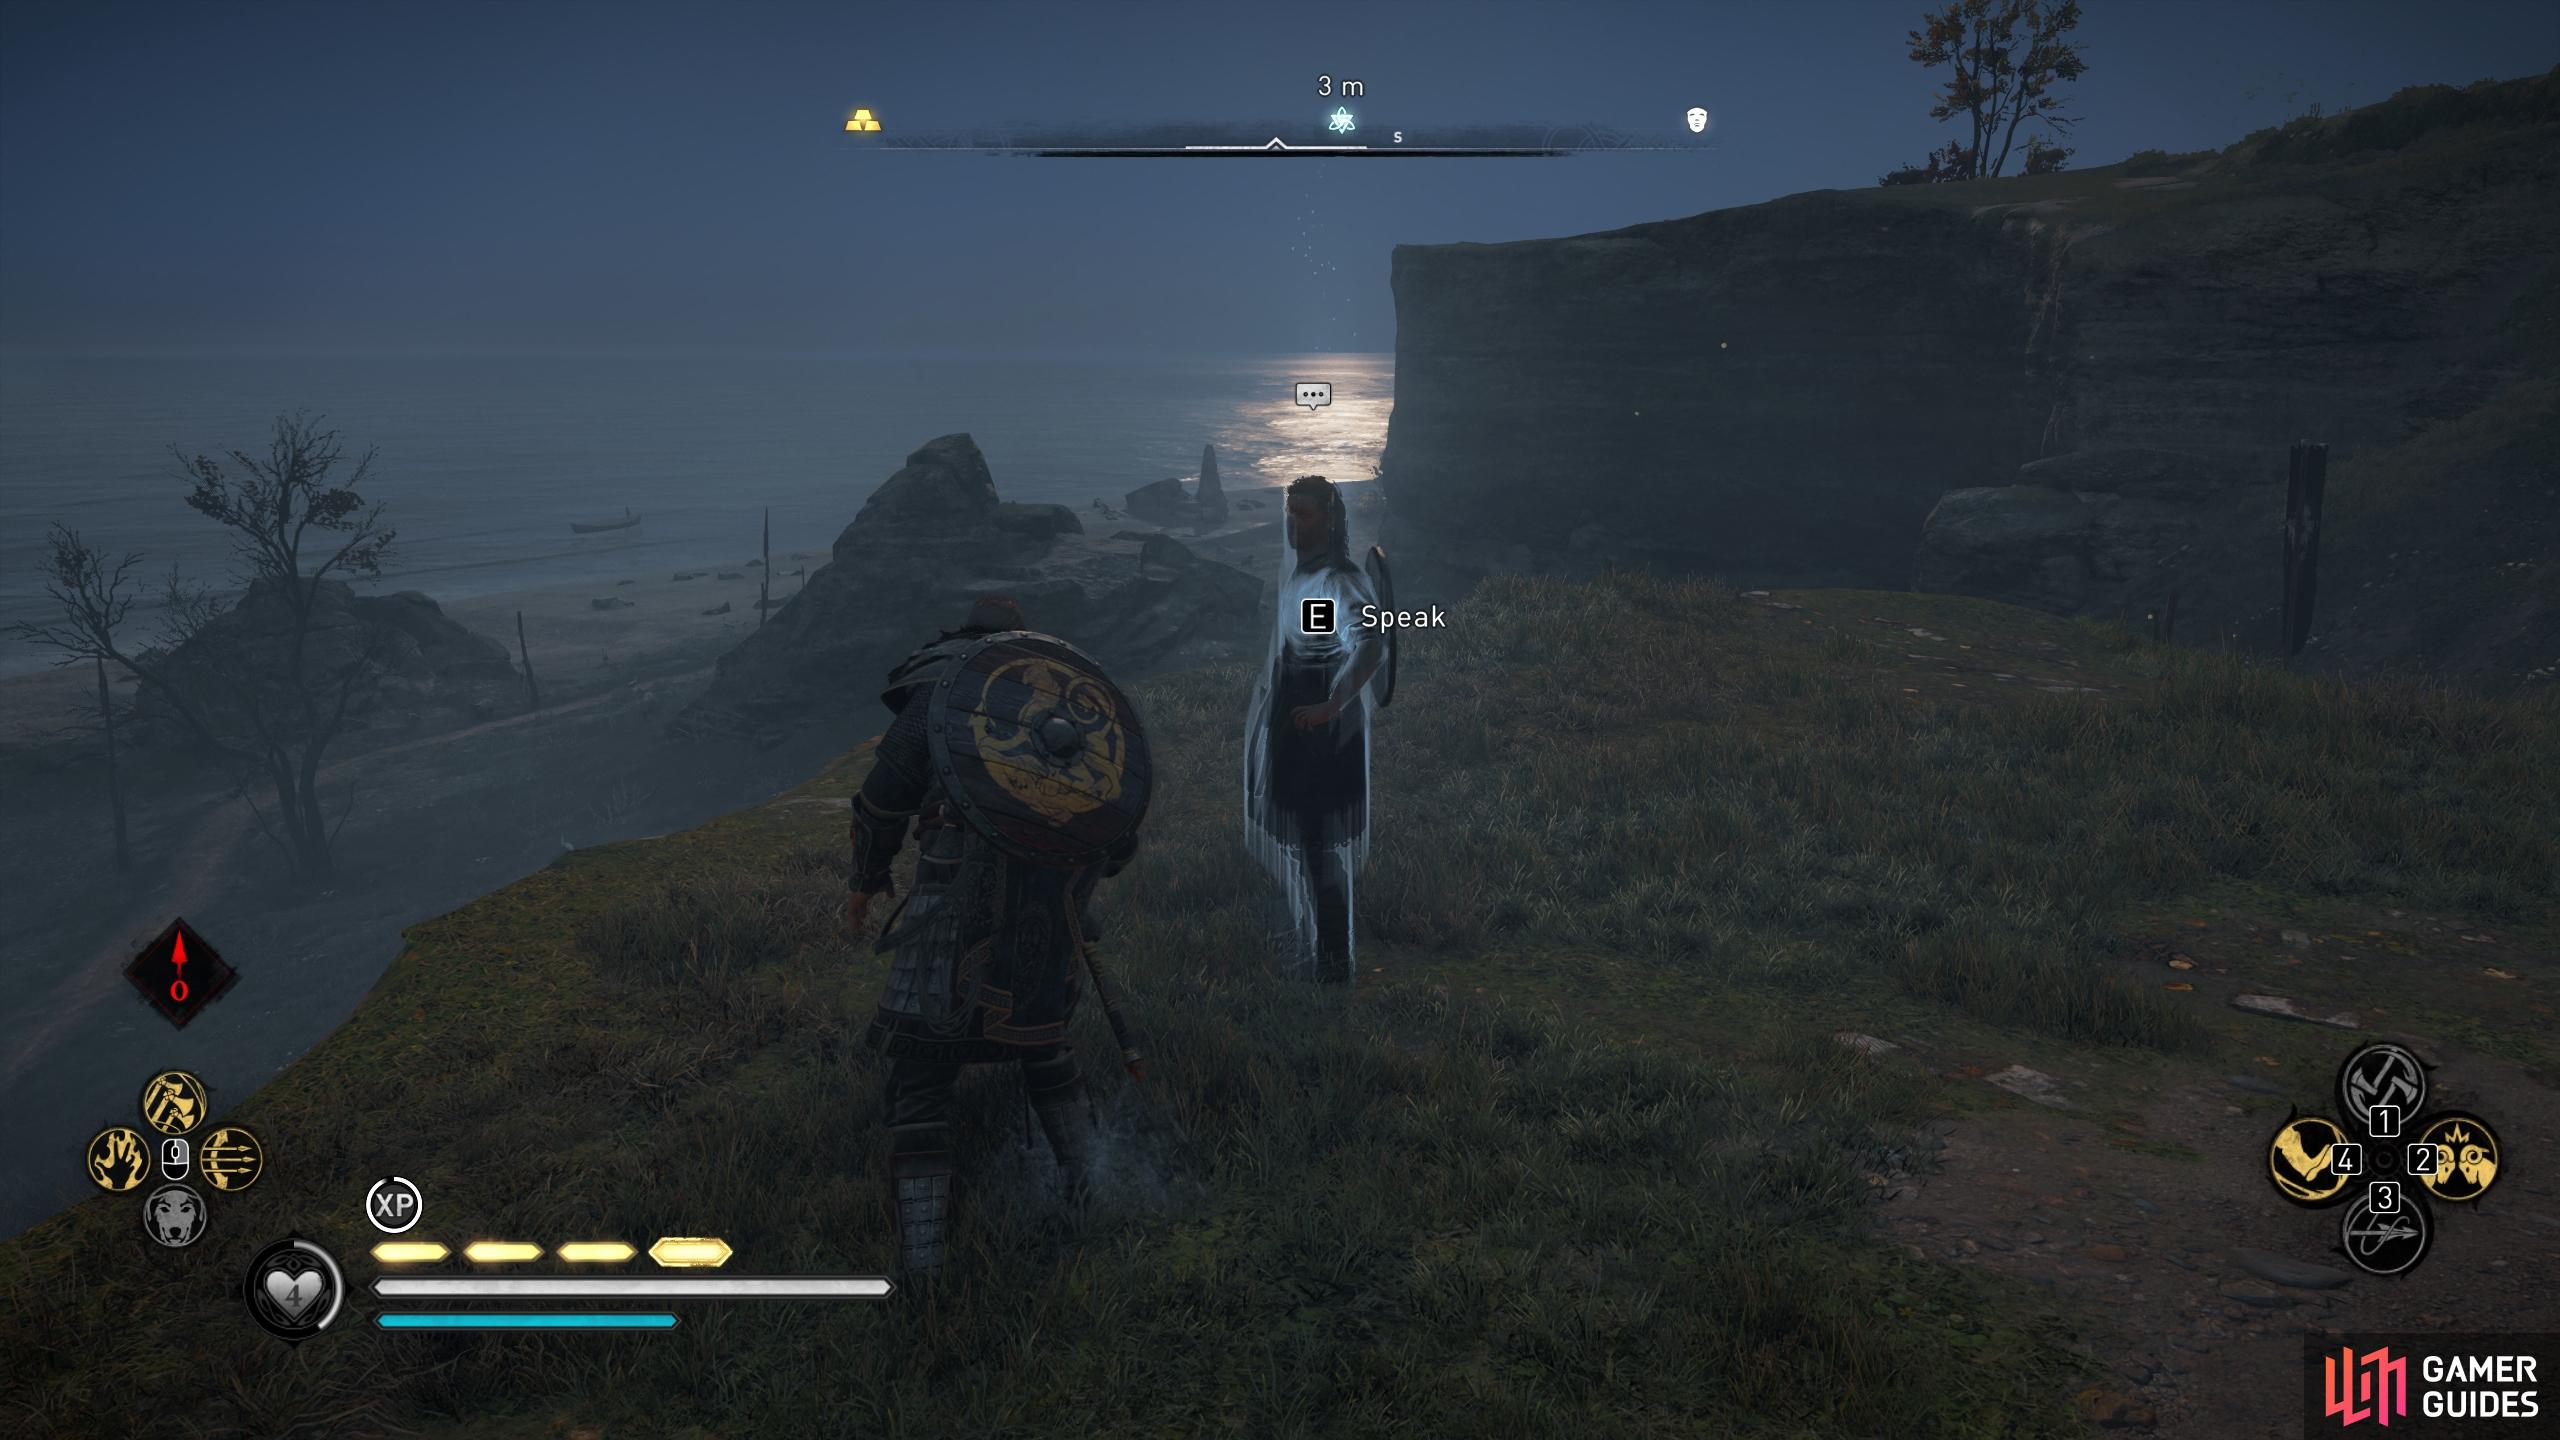 Once you've killed all the bandits, return to Skegi on the cliff edge.